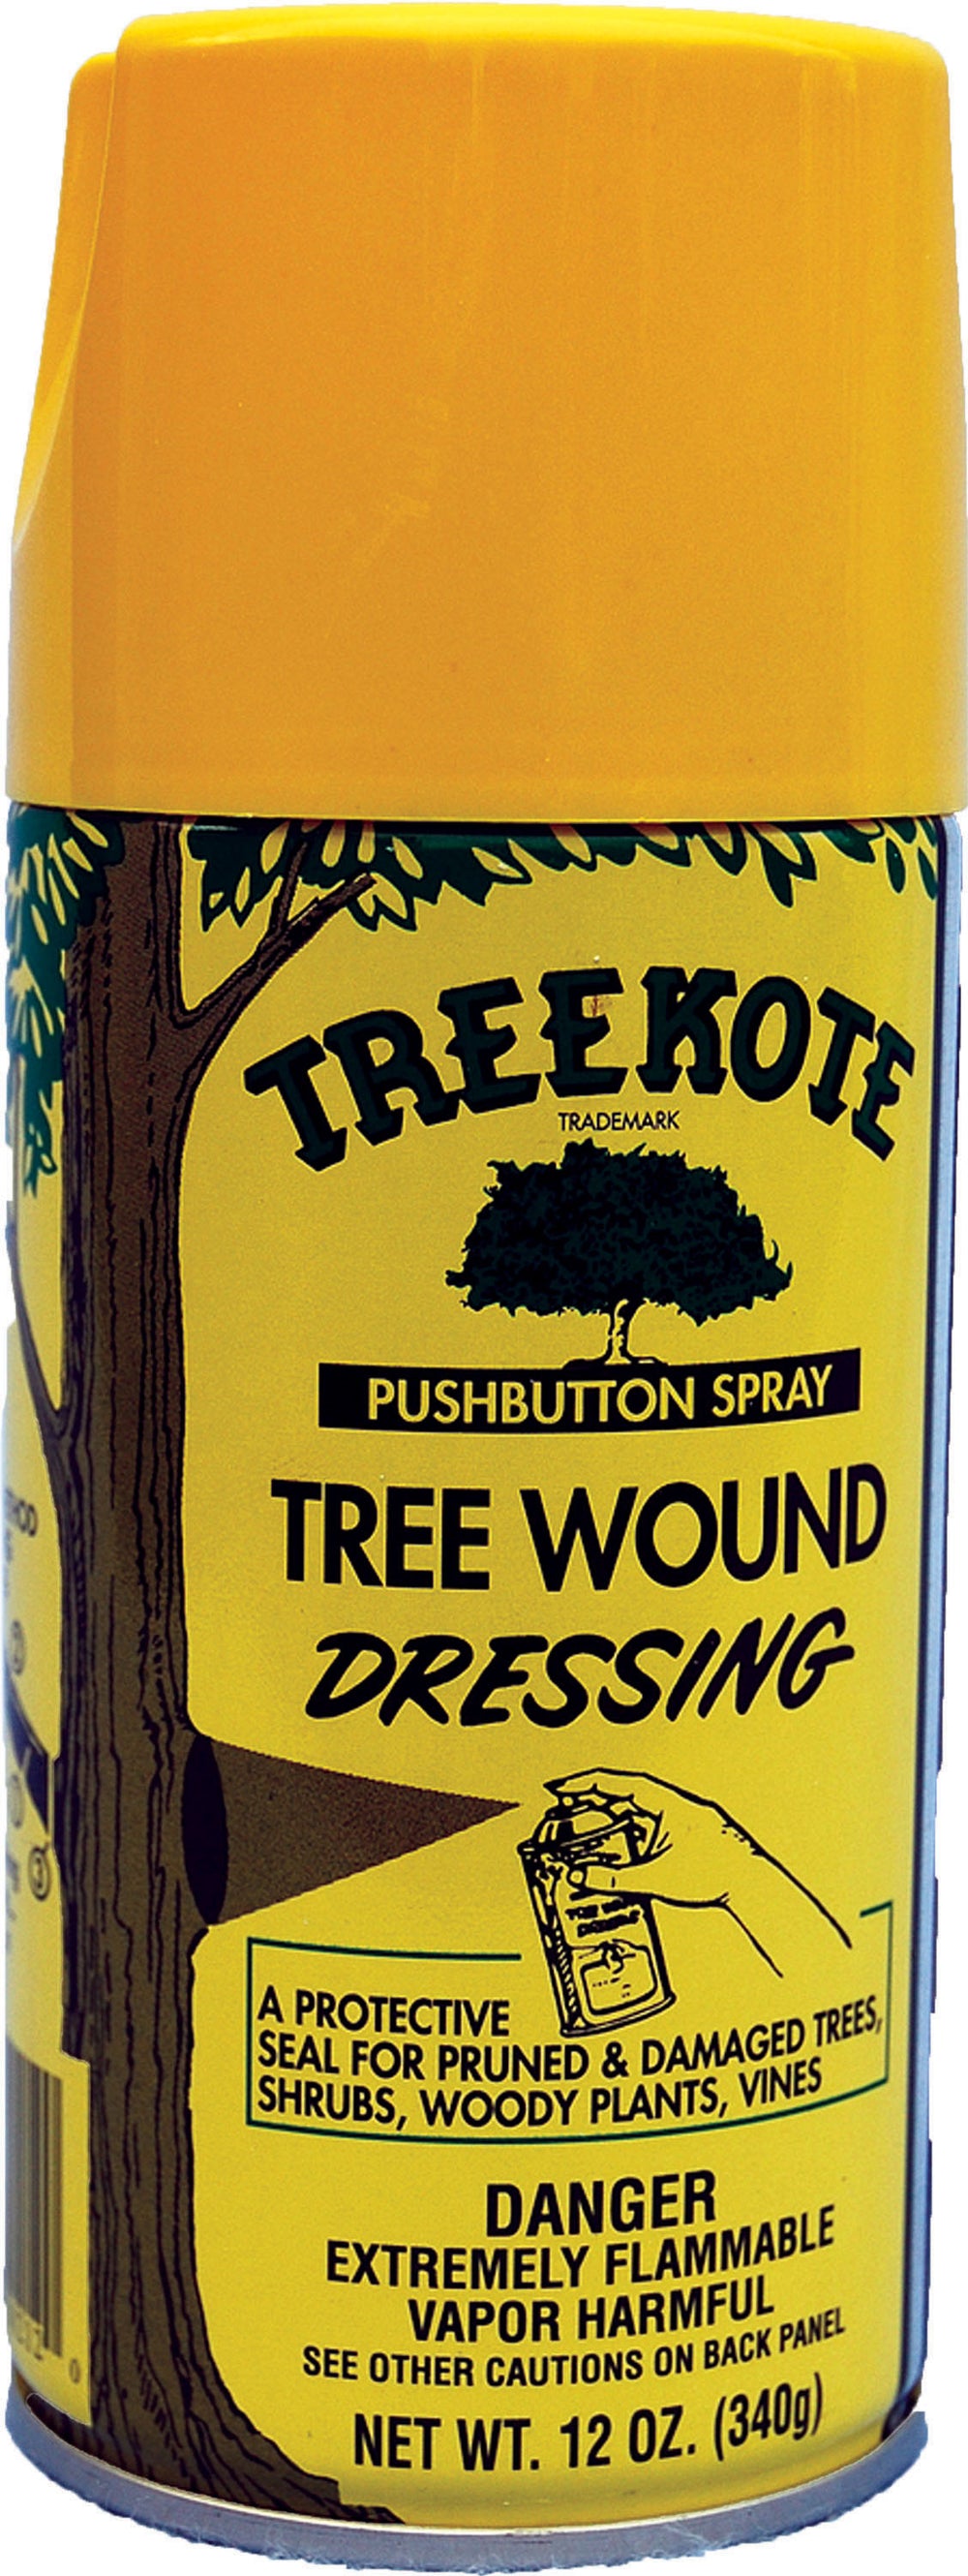 Eaton Brothers Corp. - Treekote Wound Dressing Aerosol Spray (Case of 12 )